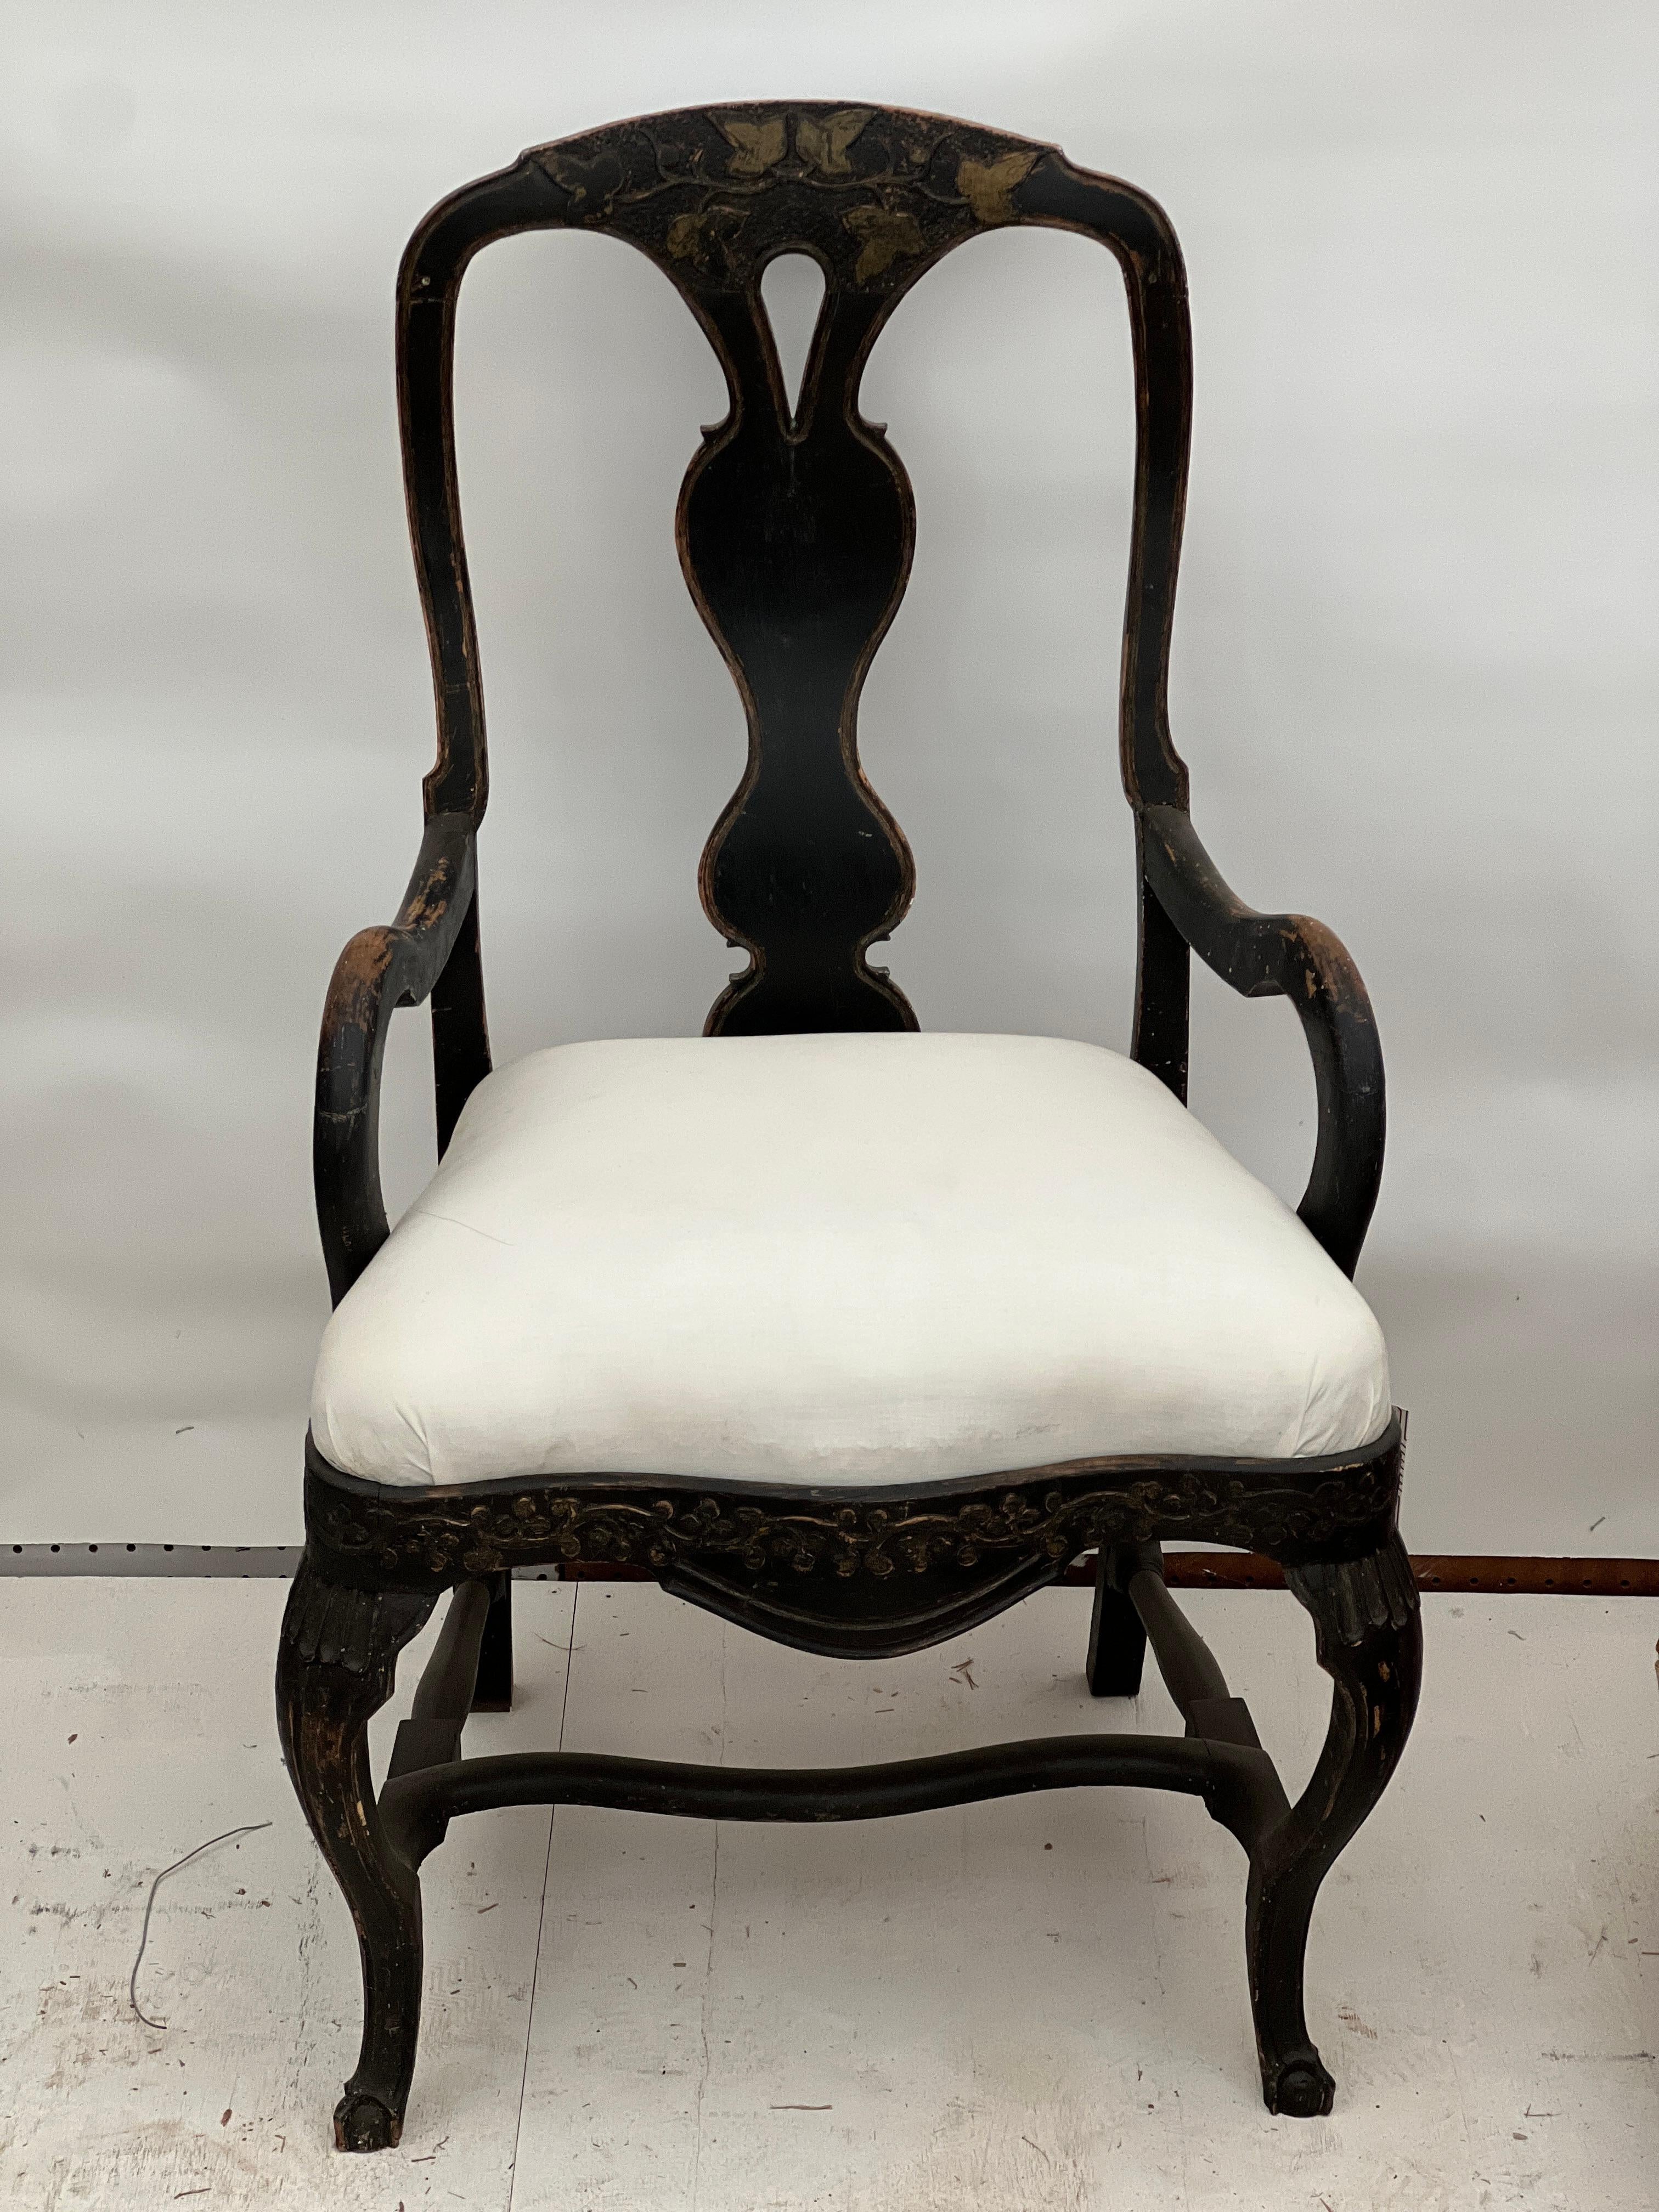 A stunning late 18th century/early 19th century Swedish Rococo armchair featuring black paint with natural worn patina coming through showcasing the original wood color with also deep green hues on the leaves. This is a stunning piece that could be